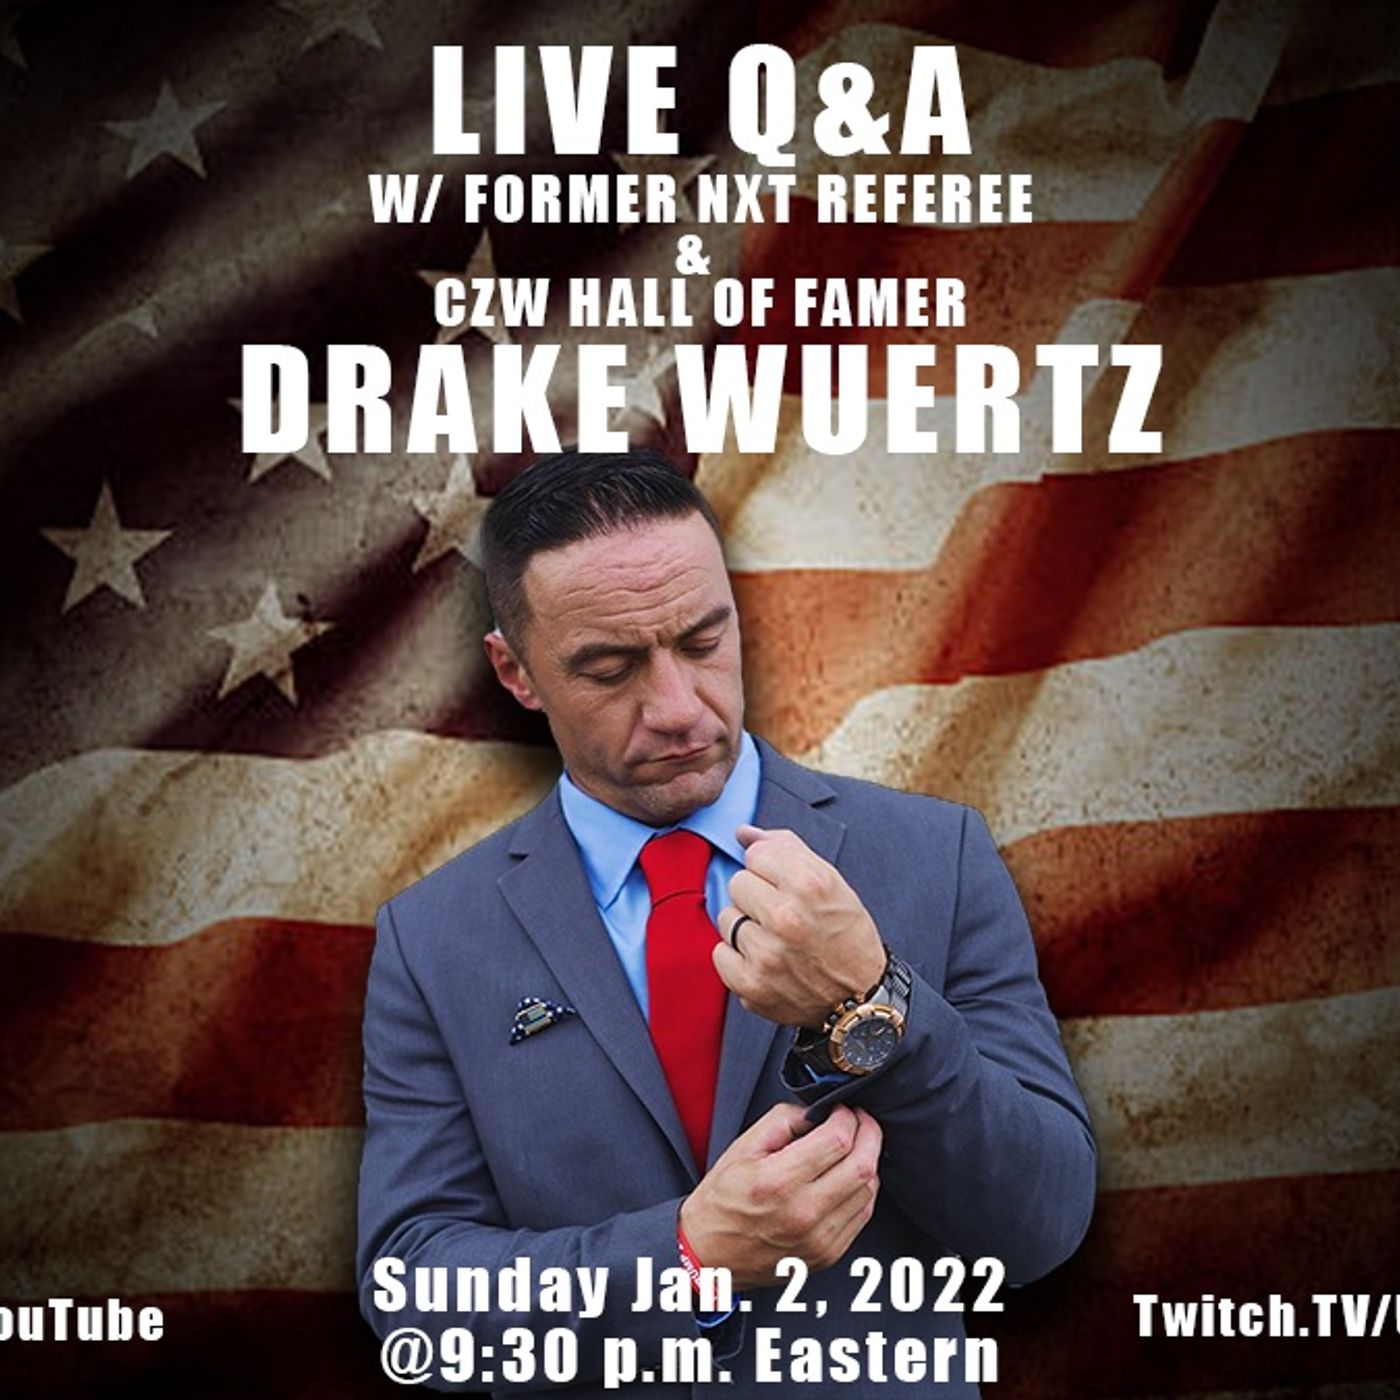 LIVE Q&A WIth Drake!